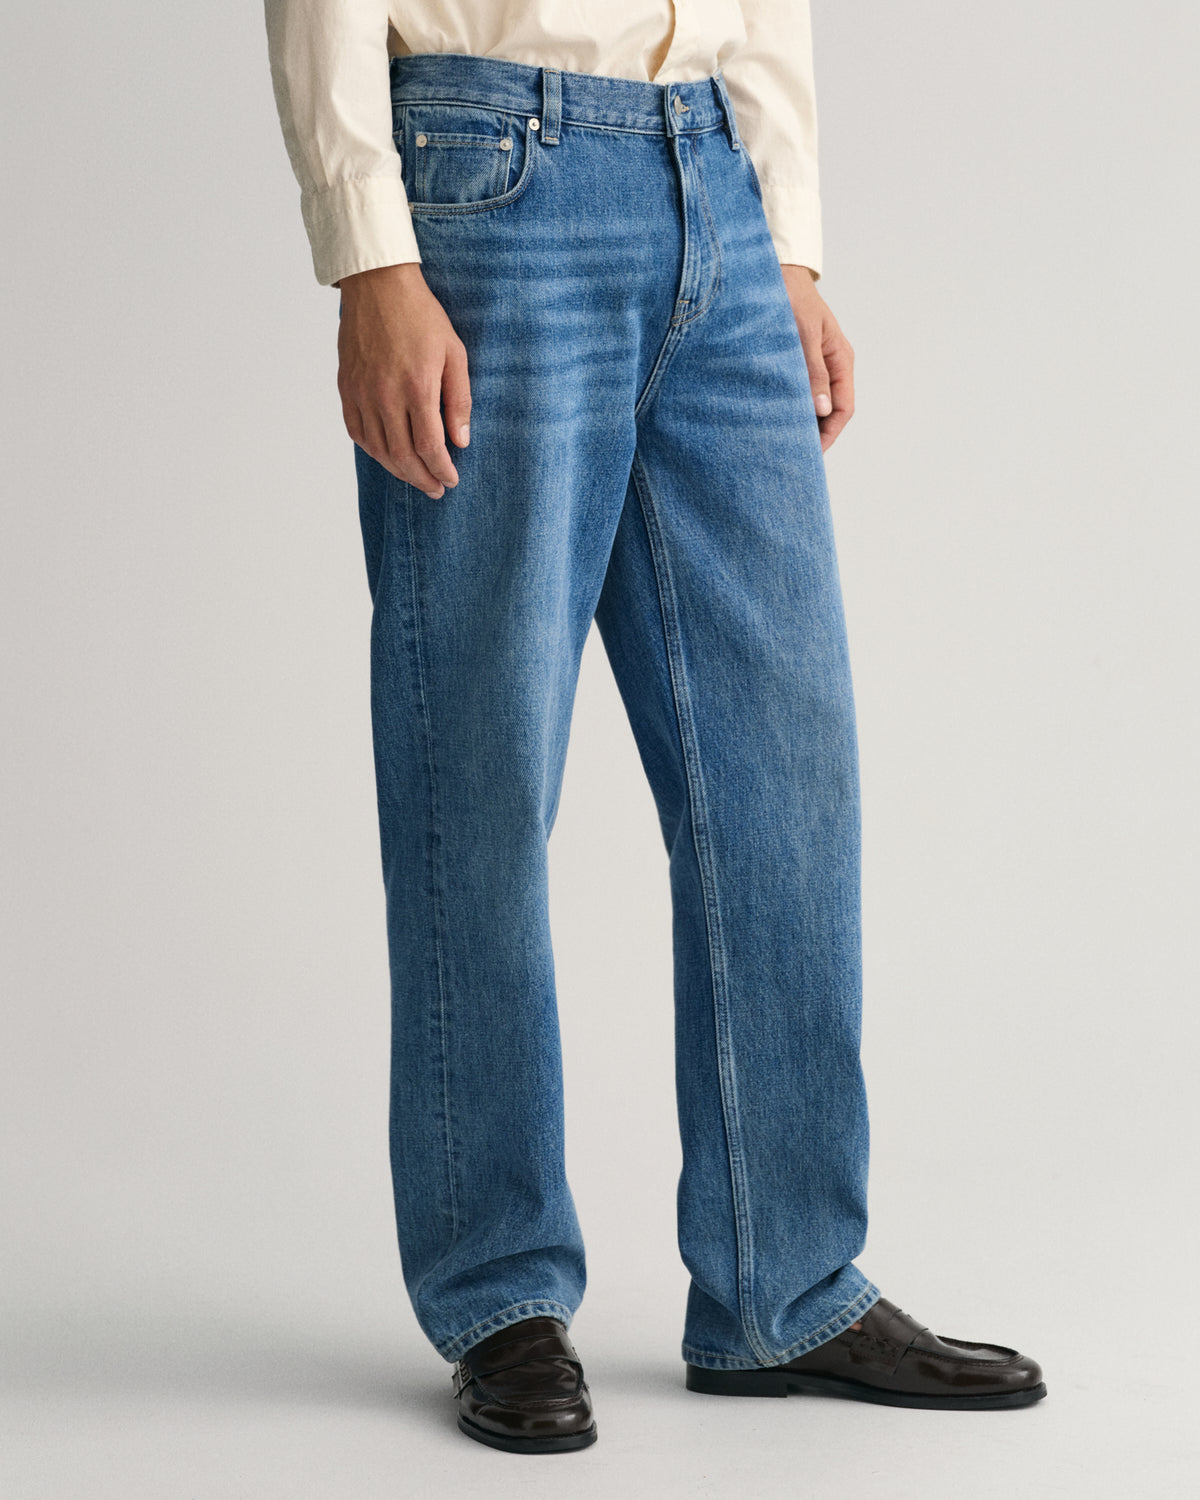 Gant Men Relaxed Fit Light Fade Clean Look Cotton Jeans